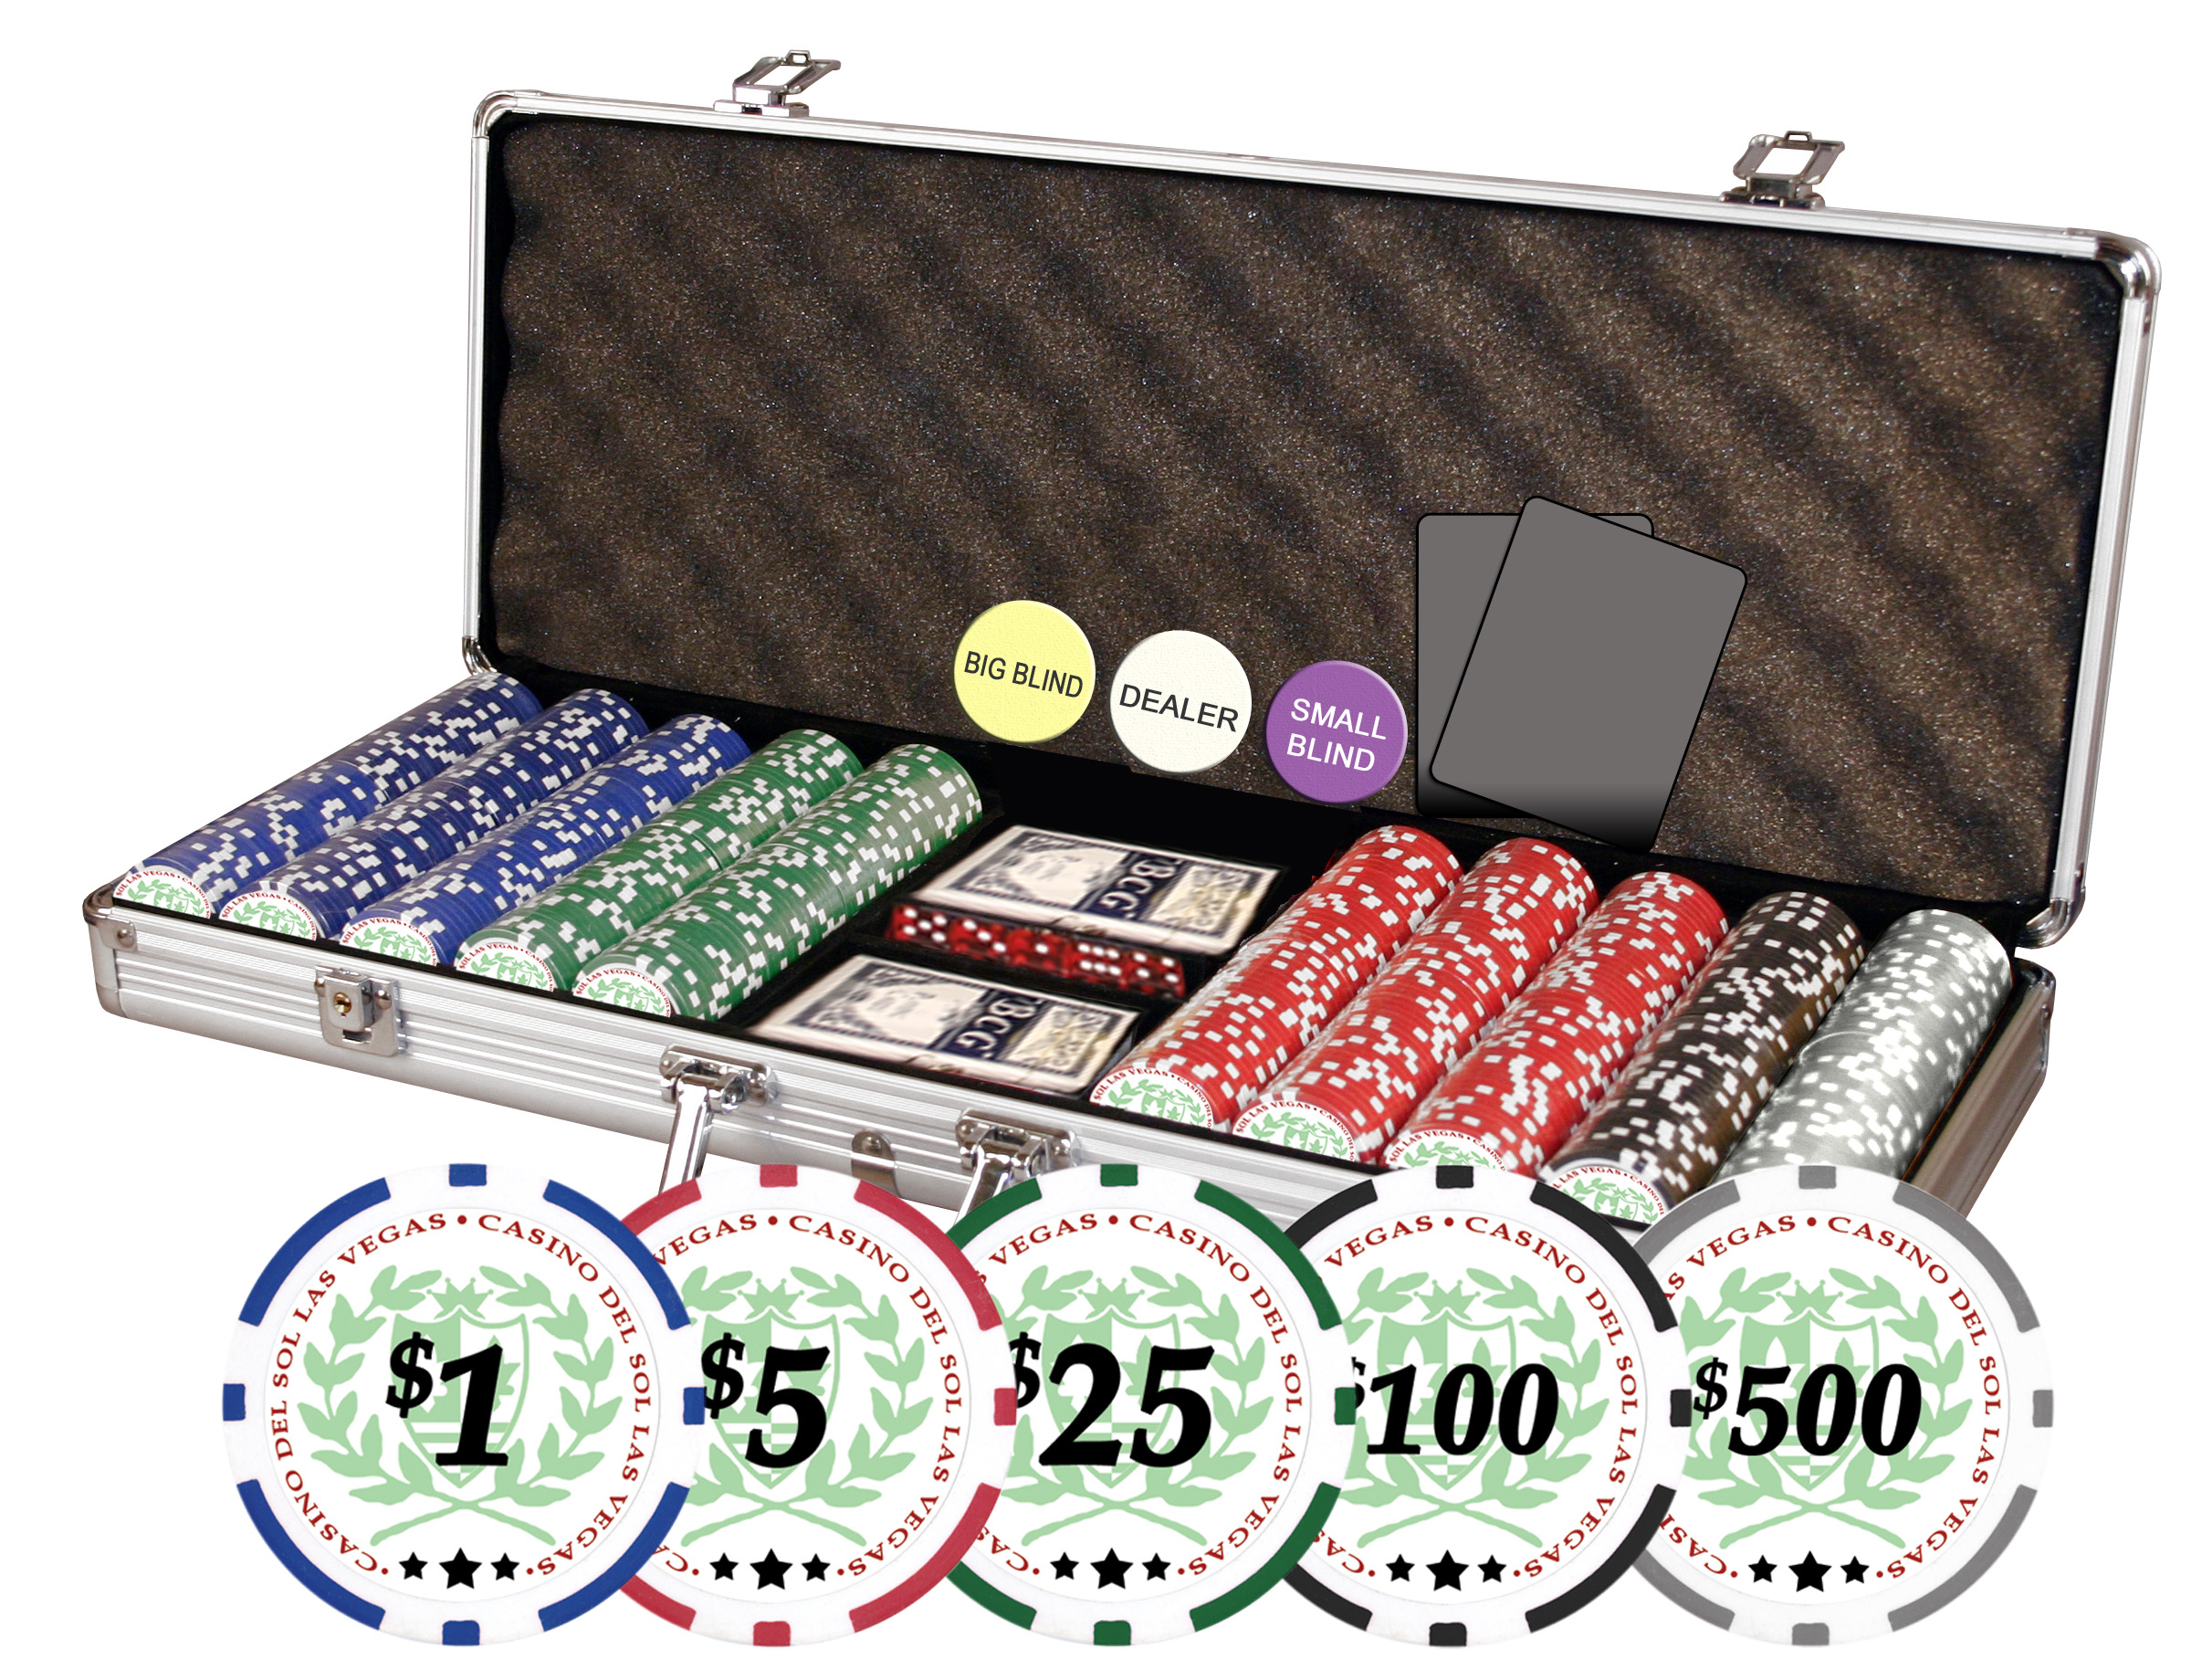 DA VINCI Professional Casino Del Sol Poker Chips Set with Case (Set of 500), 11.5gm, with Upgraded Case, 2 Decks of Plastic Playing Cards, Cut Cards and Dealer Buttons - image 1 of 2